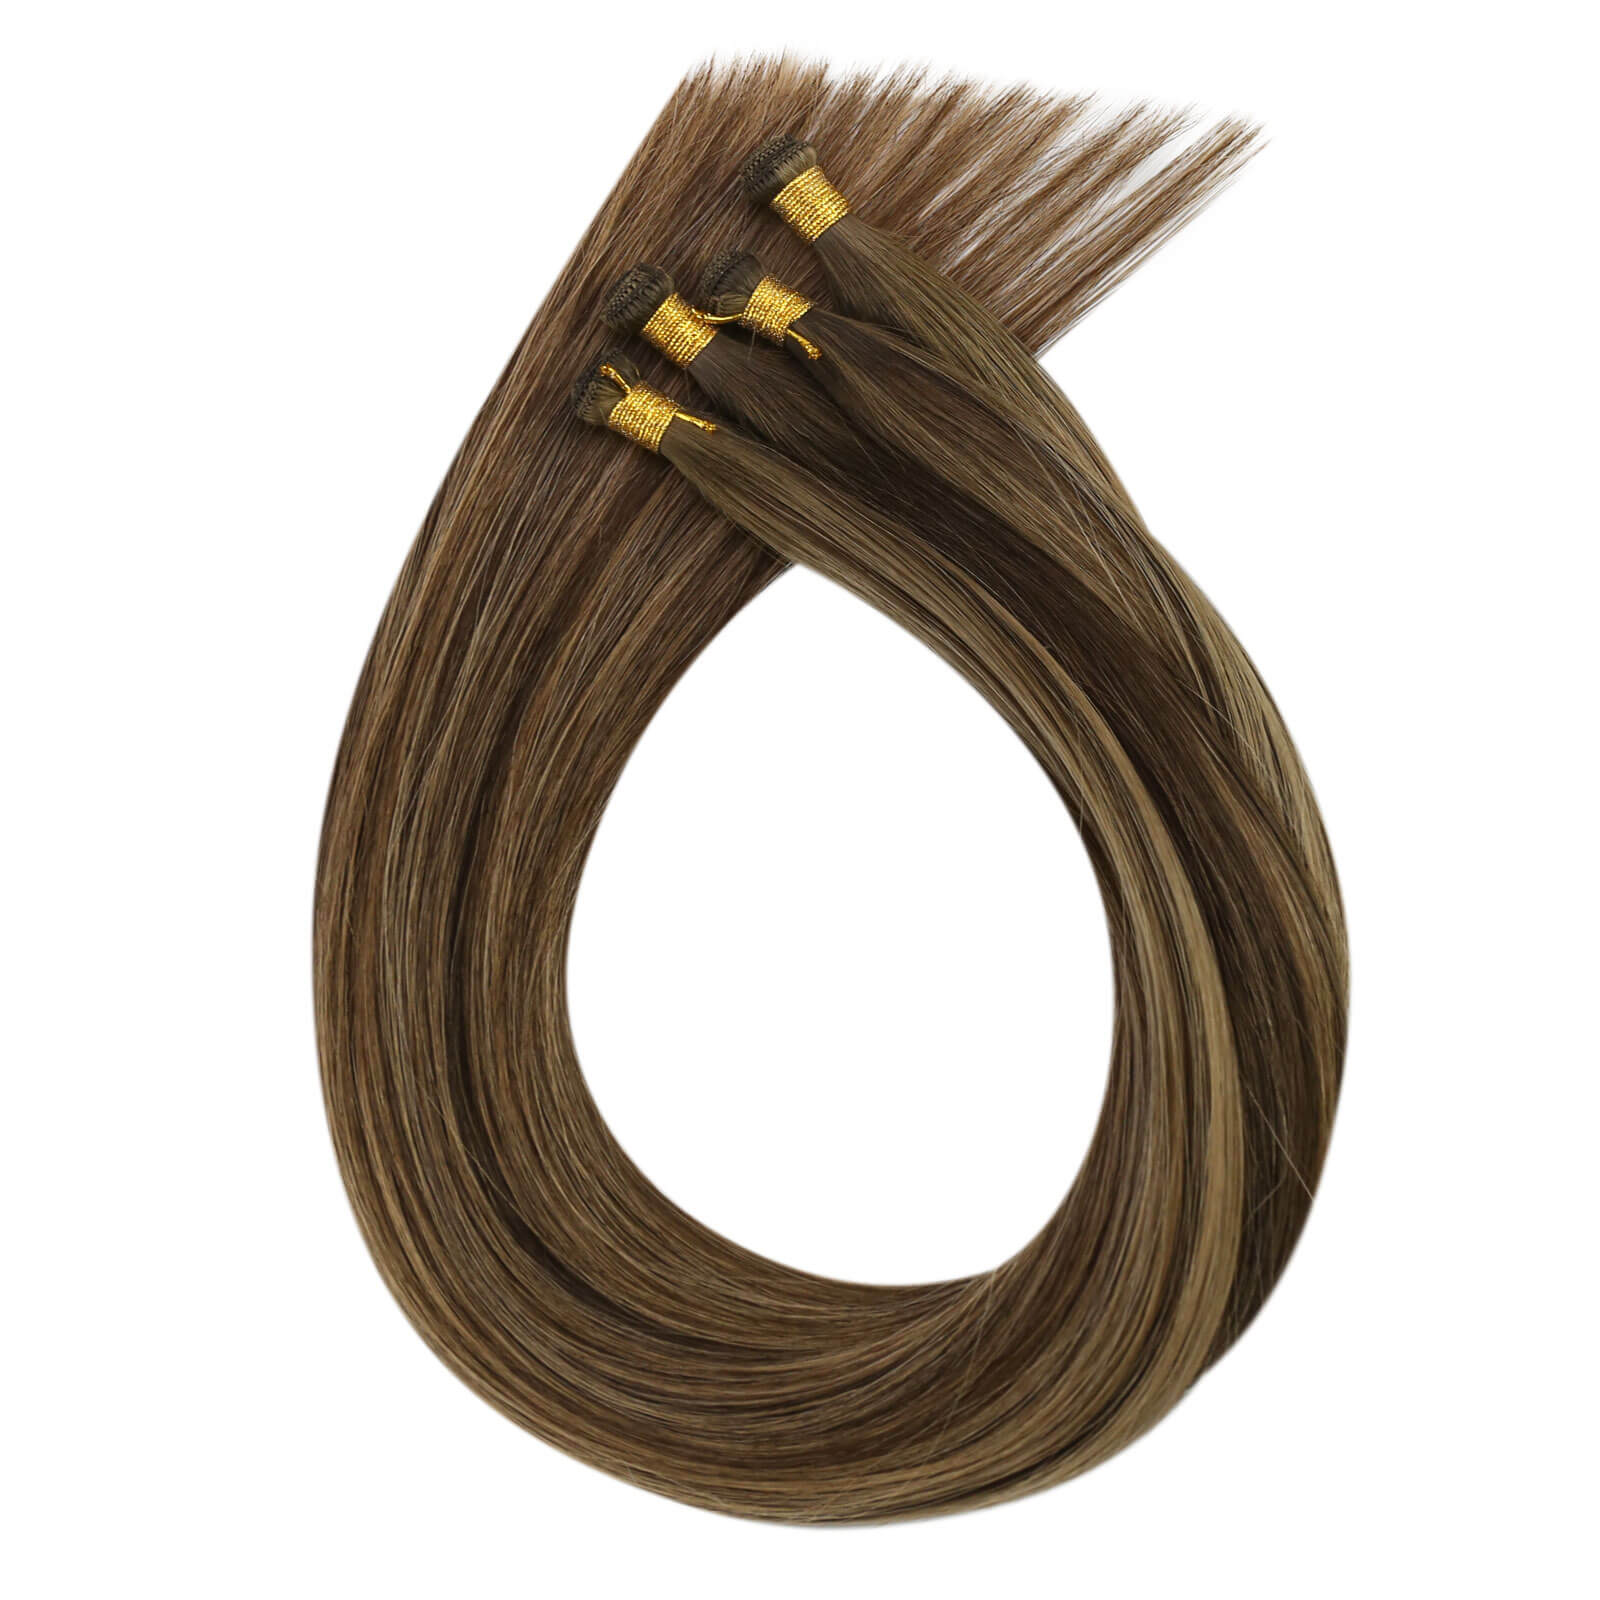 best hand tied weft extensions,hand tied weft extensions,hand tied weft extensions,hand tied extensions